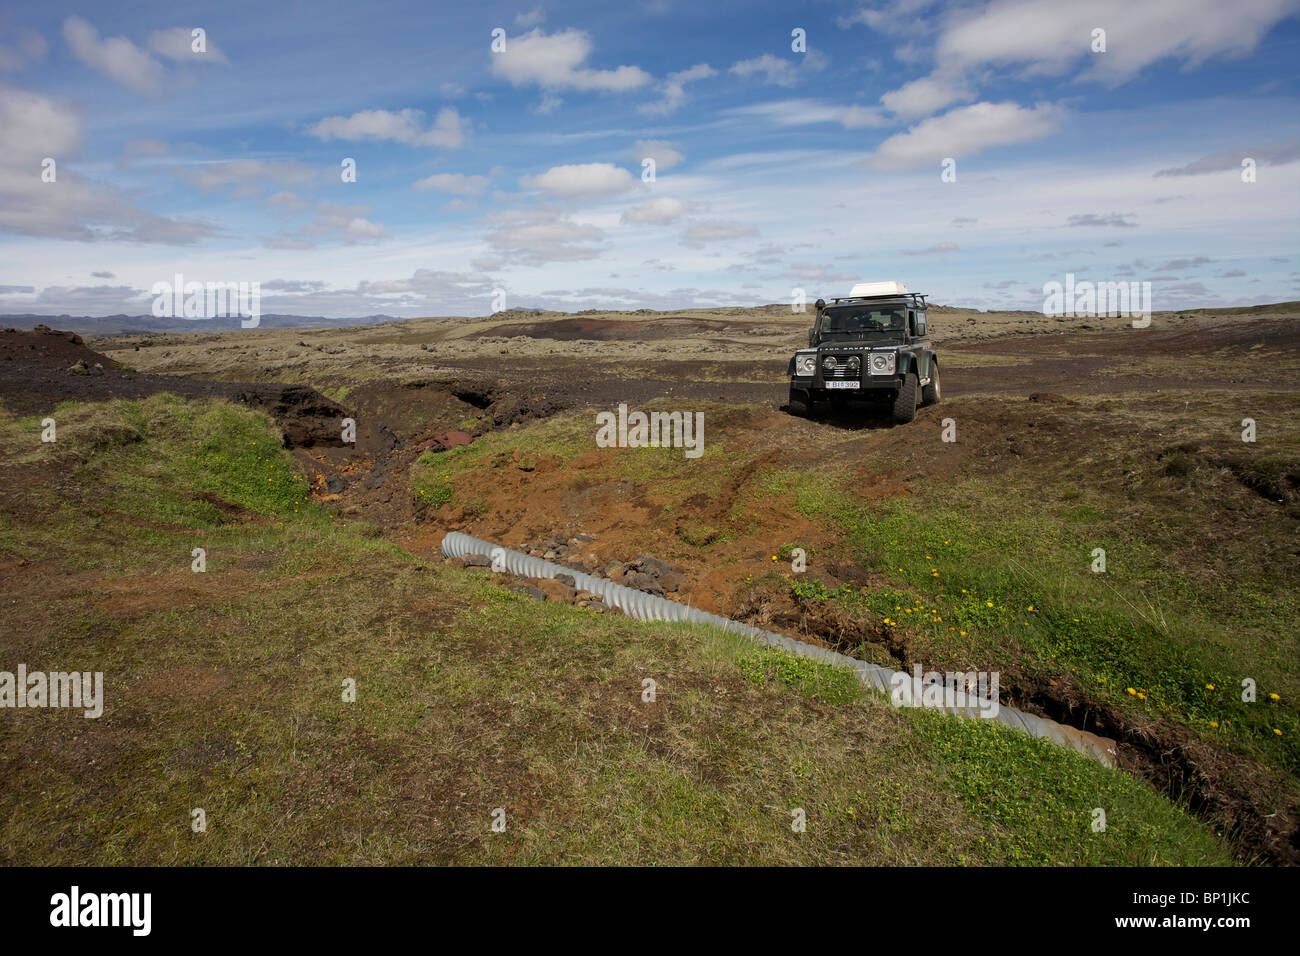 Land Rover Defender TDI goes across a washed out road in the highlands of Iceland near Laki Craters. Vatnajokull National Park Stock Photo